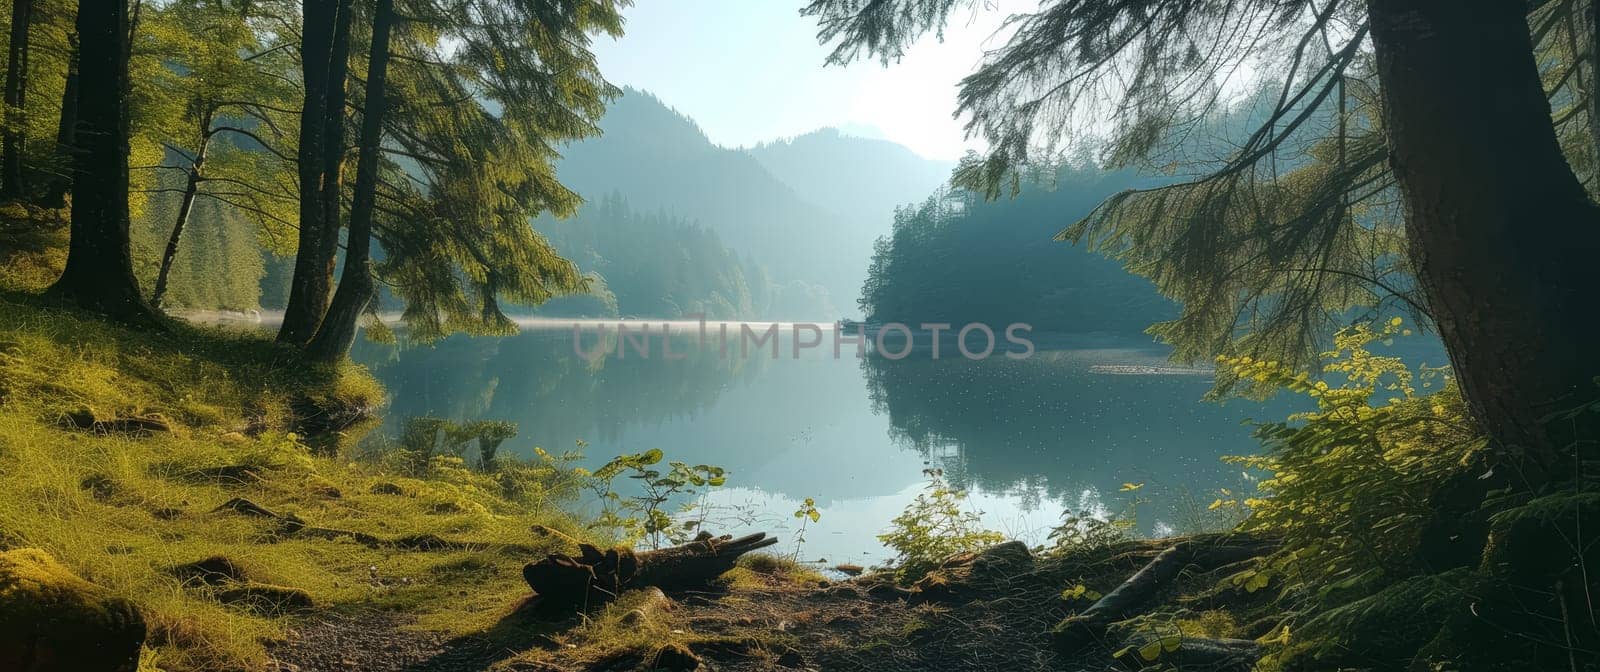 Calm lake reflecting the serene beauty of a mountain landscape and lush forests in a tranquil morning setting. by sfinks